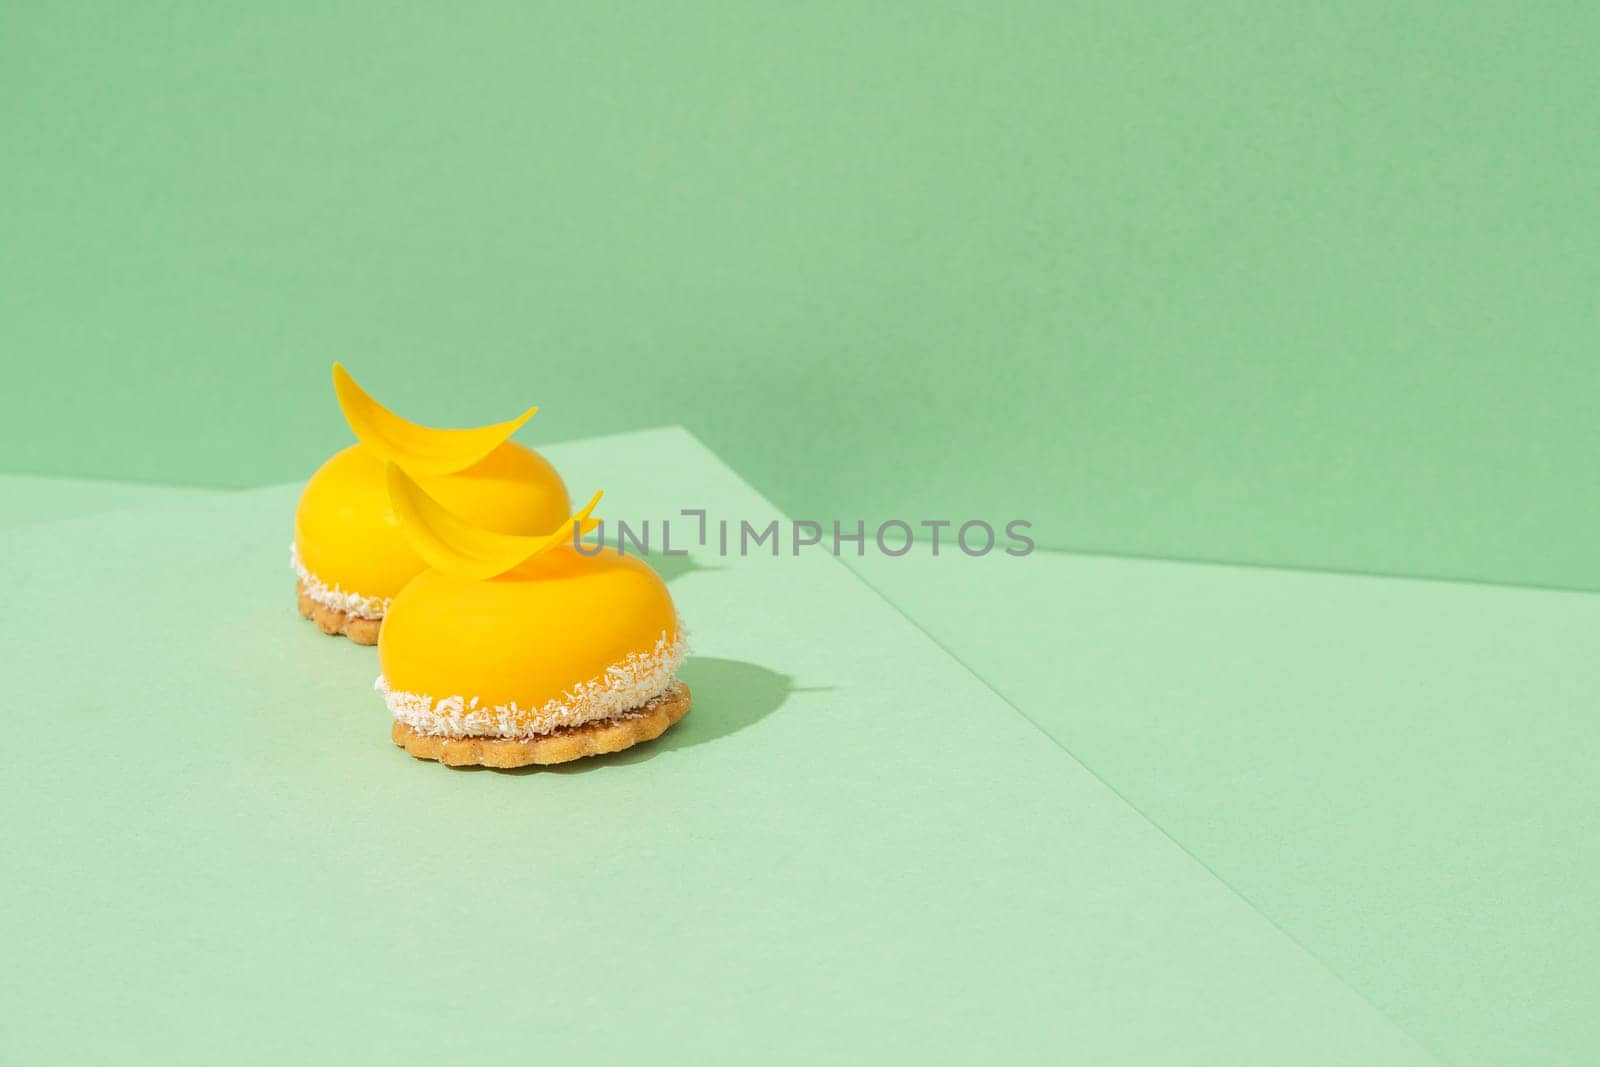 A tray of freshly baked yellow cupcakes with delicious white whipped icing on top and green background by A_Karim